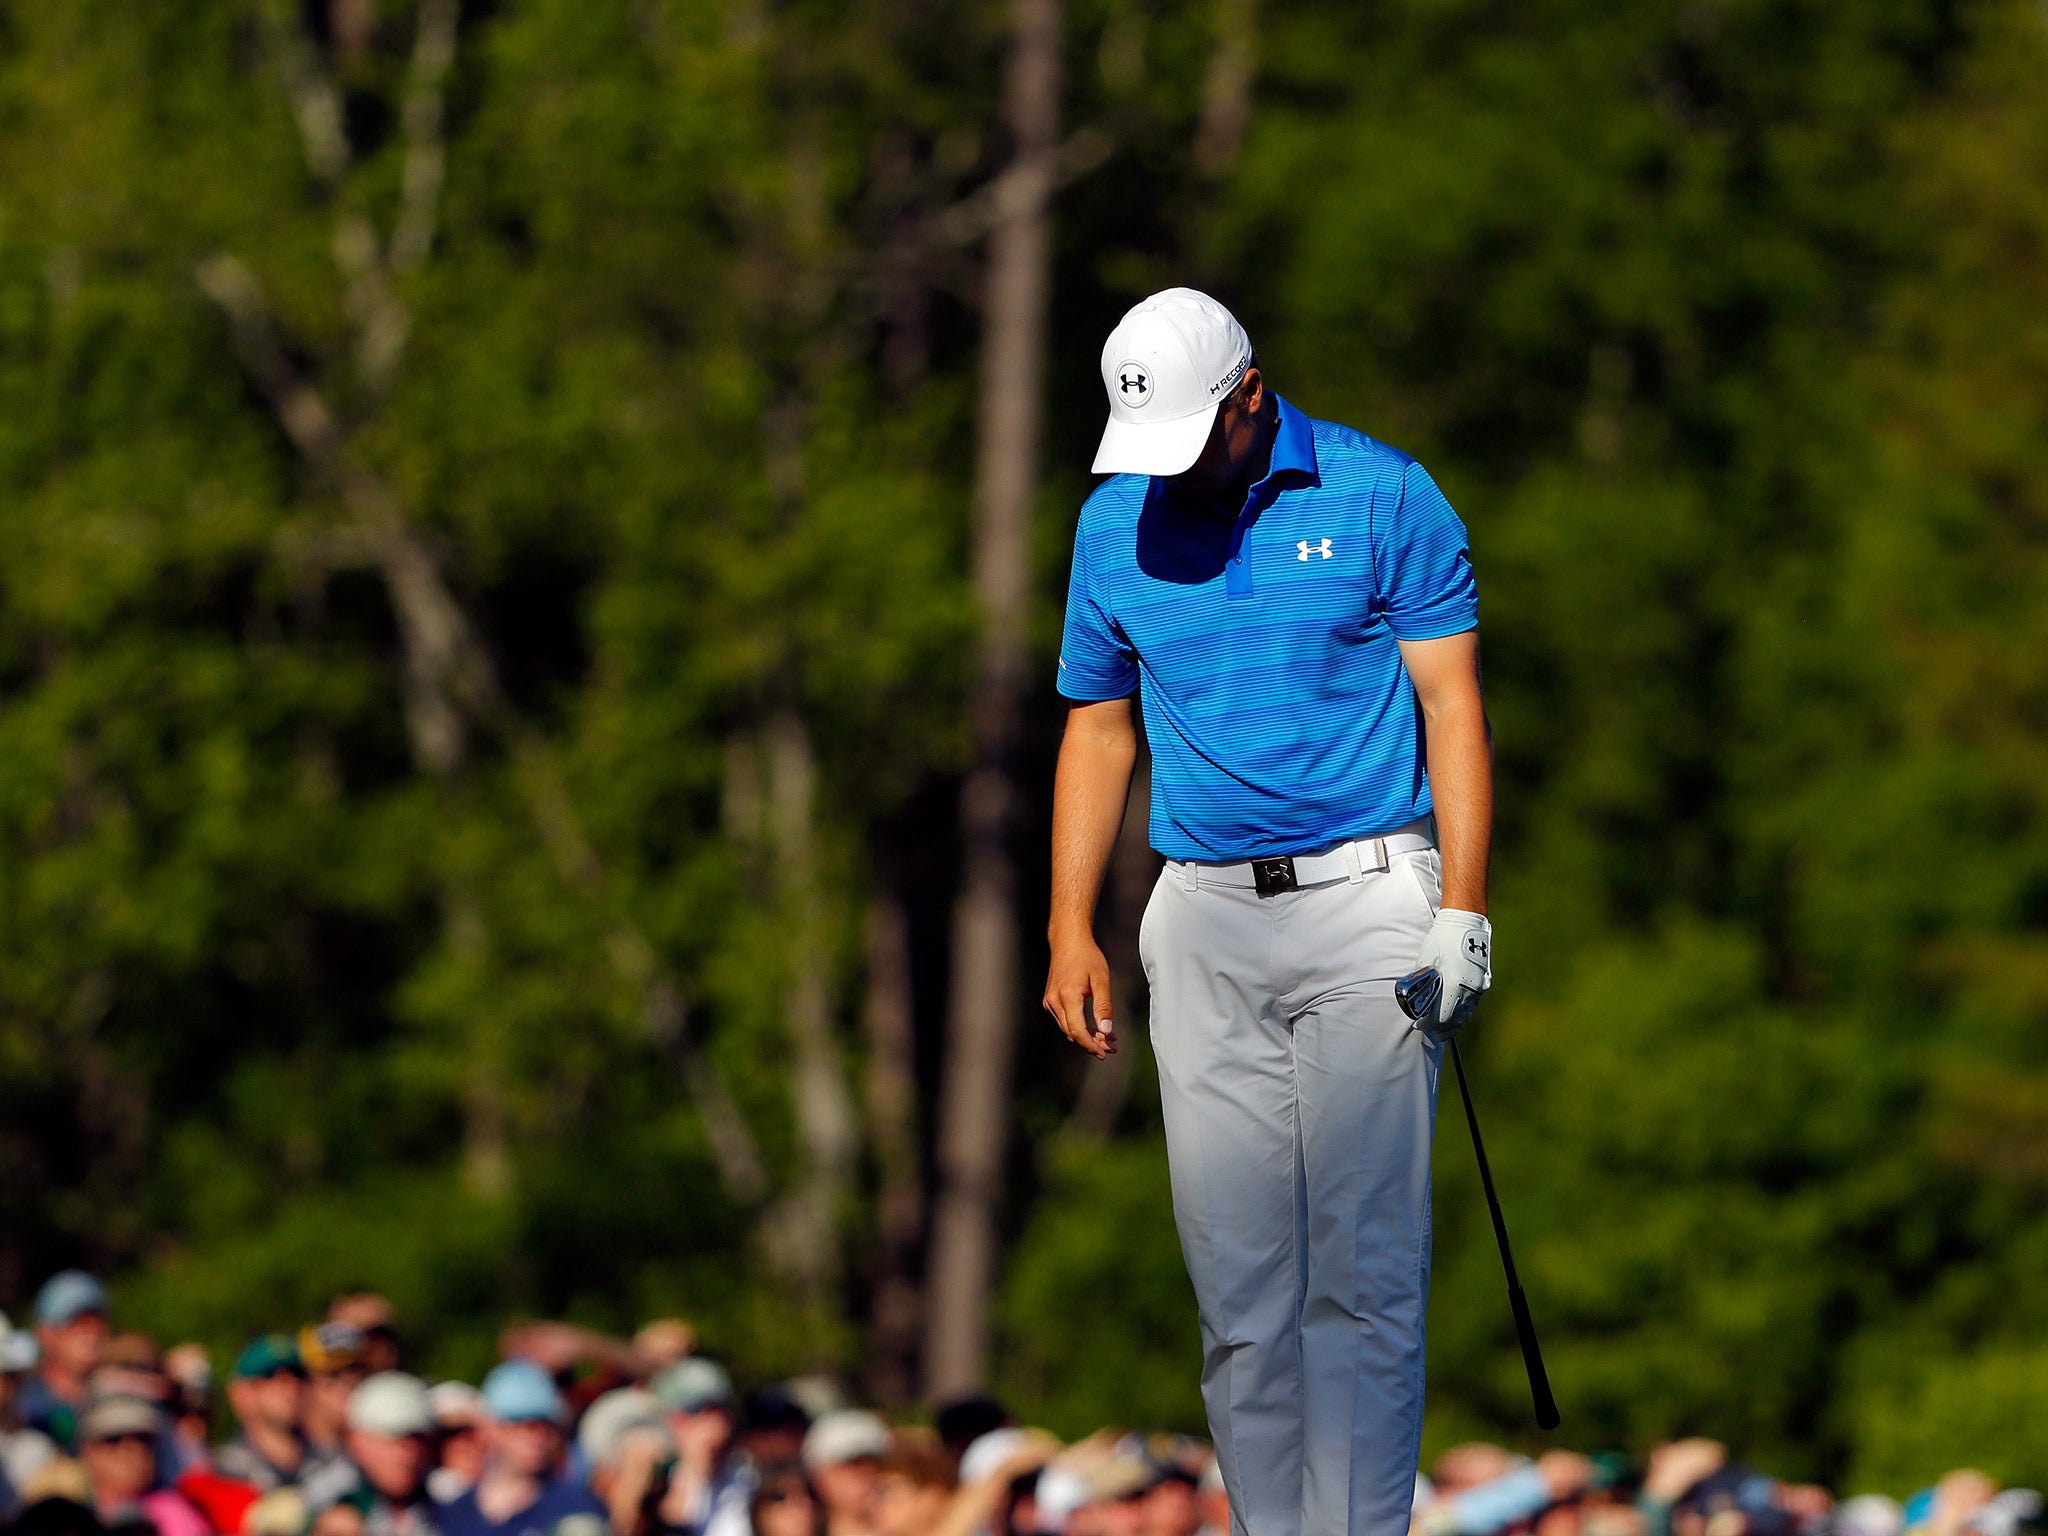 Jordan Spieth reacts after hitting into the water for the second time on the 12th hole